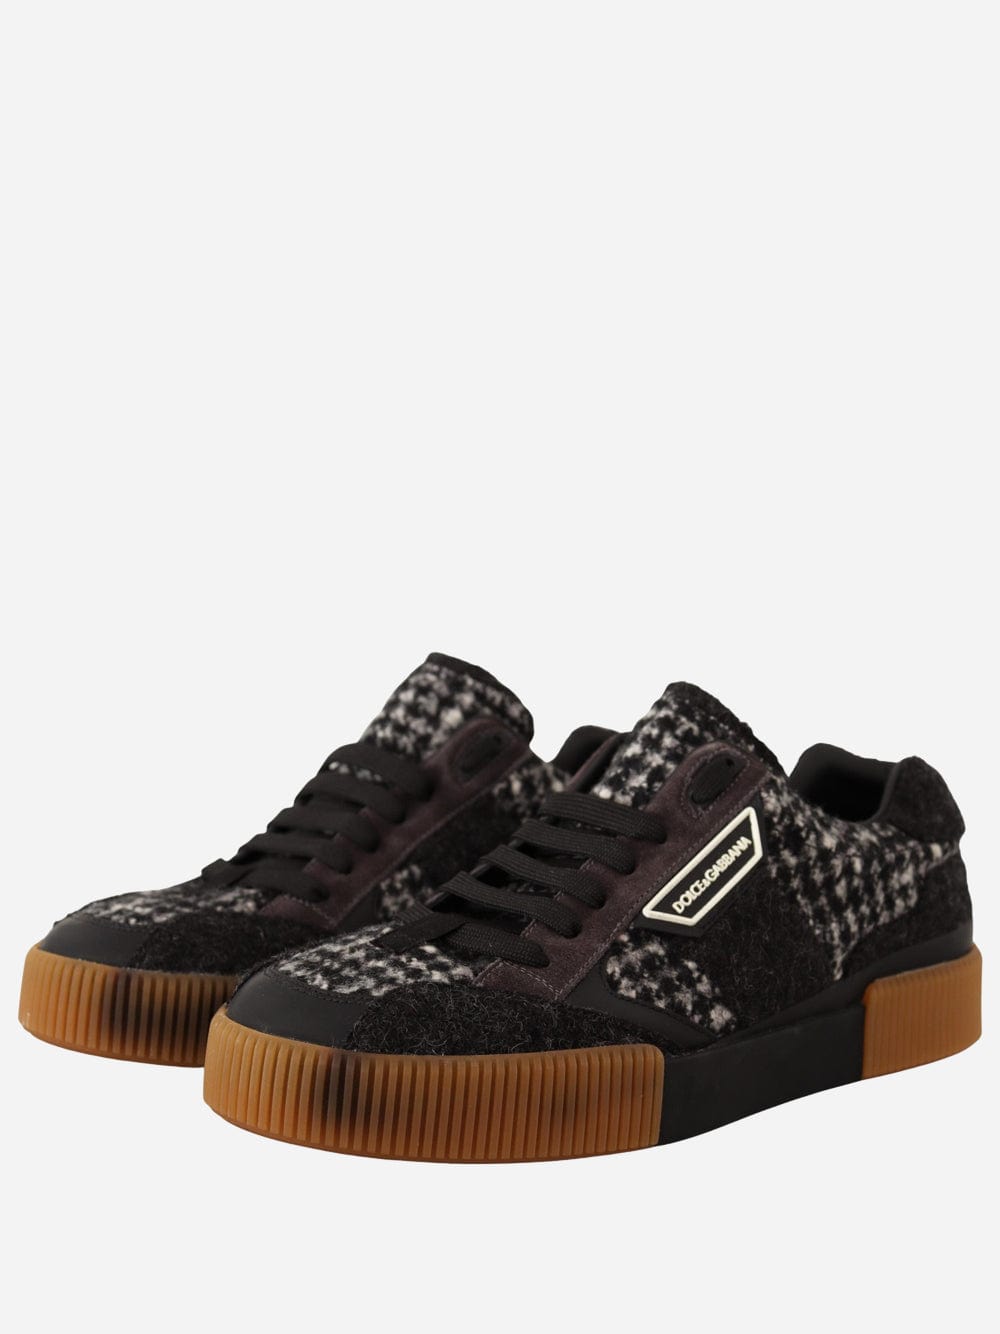 Dolce & Gabbana Plaid Miami DNA Low Top Sneakers